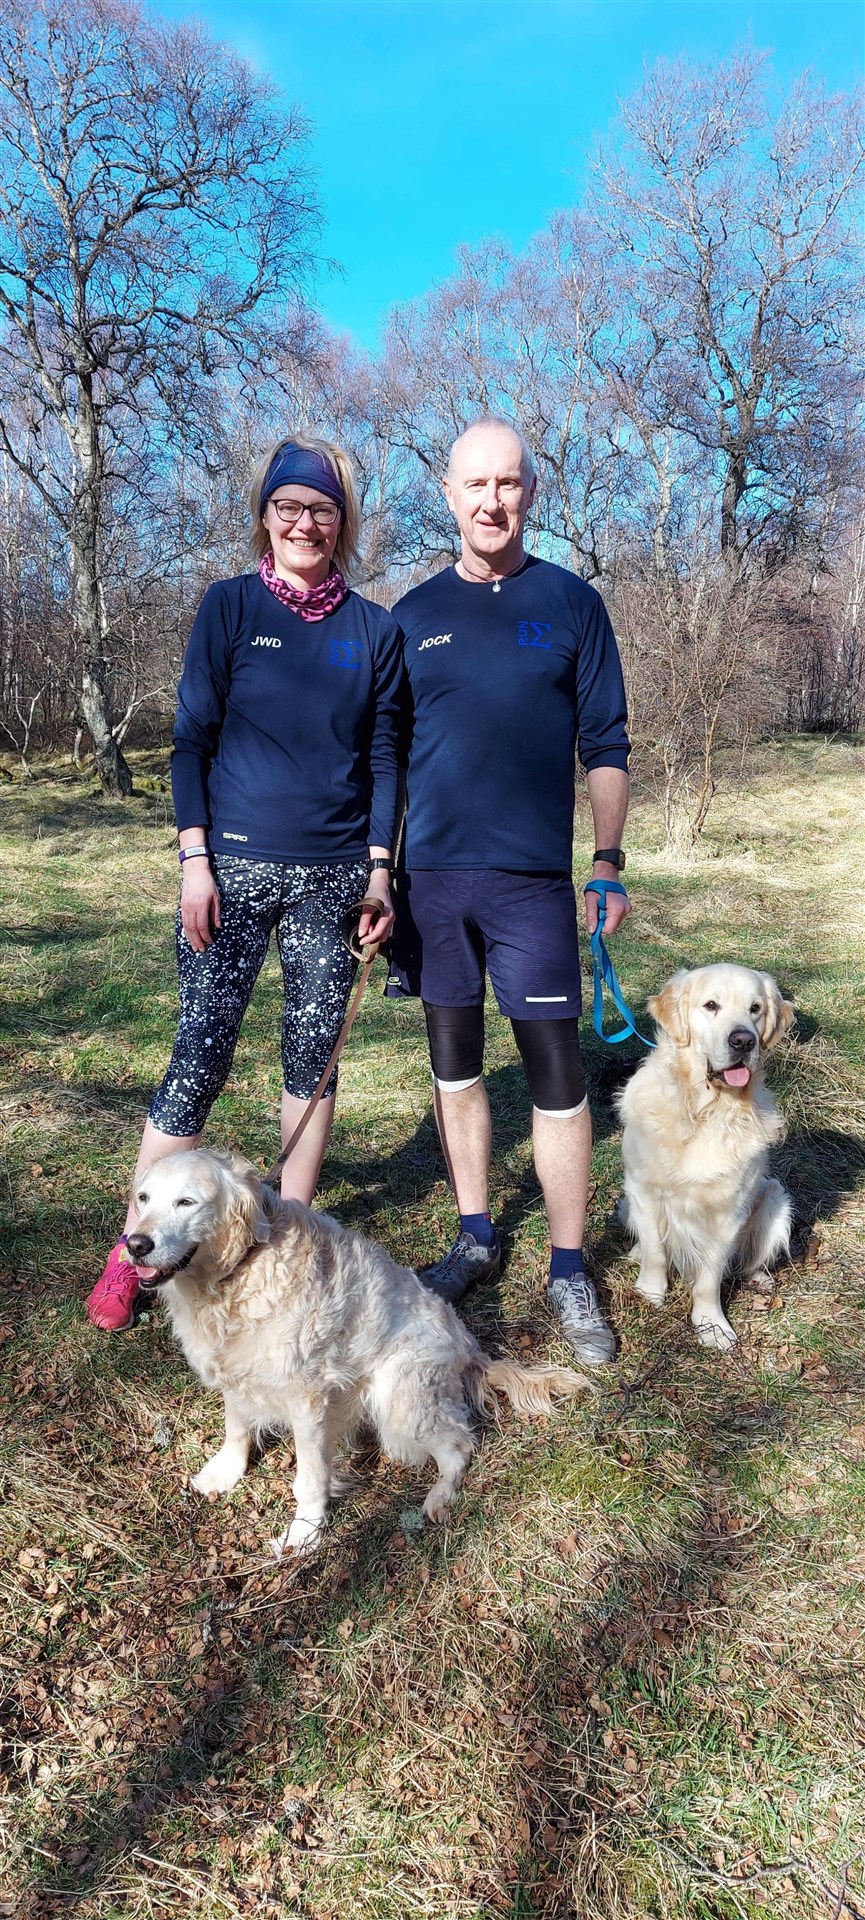 Joanne and John Dryburgh with their dogs on a "beaut" of a day this week.